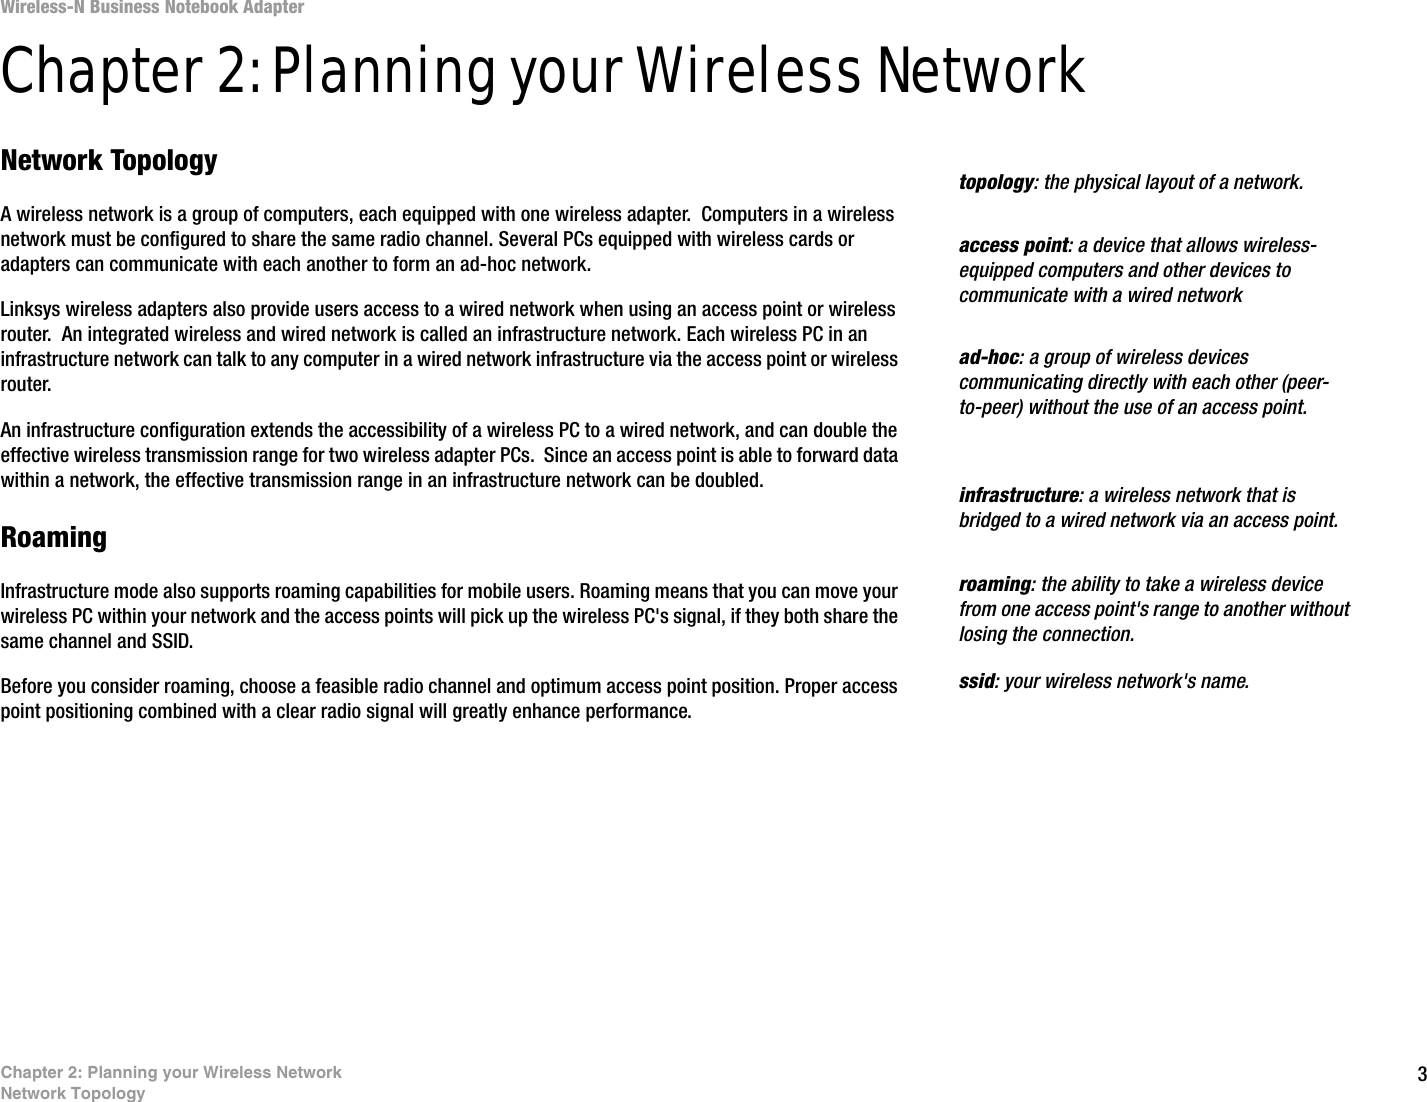 3Chapter 2: Planning your Wireless NetworkNetwork TopologyWireless-N Business Notebook Adapter Chapter 2: Planning your Wireless NetworkNetwork TopologyA wireless network is a group of computers, each equipped with one wireless adapter.  Computers in a wireless network must be configured to share the same radio channel. Several PCs equipped with wireless cards or adapters can communicate with each another to form an ad-hoc network.Linksys wireless adapters also provide users access to a wired network when using an access point or wireless router.  An integrated wireless and wired network is called an infrastructure network. Each wireless PC in an infrastructure network can talk to any computer in a wired network infrastructure via the access point or wireless router.An infrastructure configuration extends the accessibility of a wireless PC to a wired network, and can double the effective wireless transmission range for two wireless adapter PCs.  Since an access point is able to forward data within a network, the effective transmission range in an infrastructure network can be doubled.RoamingInfrastructure mode also supports roaming capabilities for mobile users. Roaming means that you can move your wireless PC within your network and the access points will pick up the wireless PC&apos;s signal, if they both share the same channel and SSID.Before you consider roaming, choose a feasible radio channel and optimum access point position. Proper access point positioning combined with a clear radio signal will greatly enhance performance.infrastructure: a wireless network that is bridged to a wired network via an access point.ad-hoc: a group of wireless devices communicating directly with each other (peer-to-peer) without the use of an access point.roaming: the ability to take a wireless device from one access point&apos;s range to another without losing the connection.ssid: your wireless network&apos;s name.topology: the physical layout of a network.access point: a device that allows wireless-equipped computers and other devices to communicate with a wired network